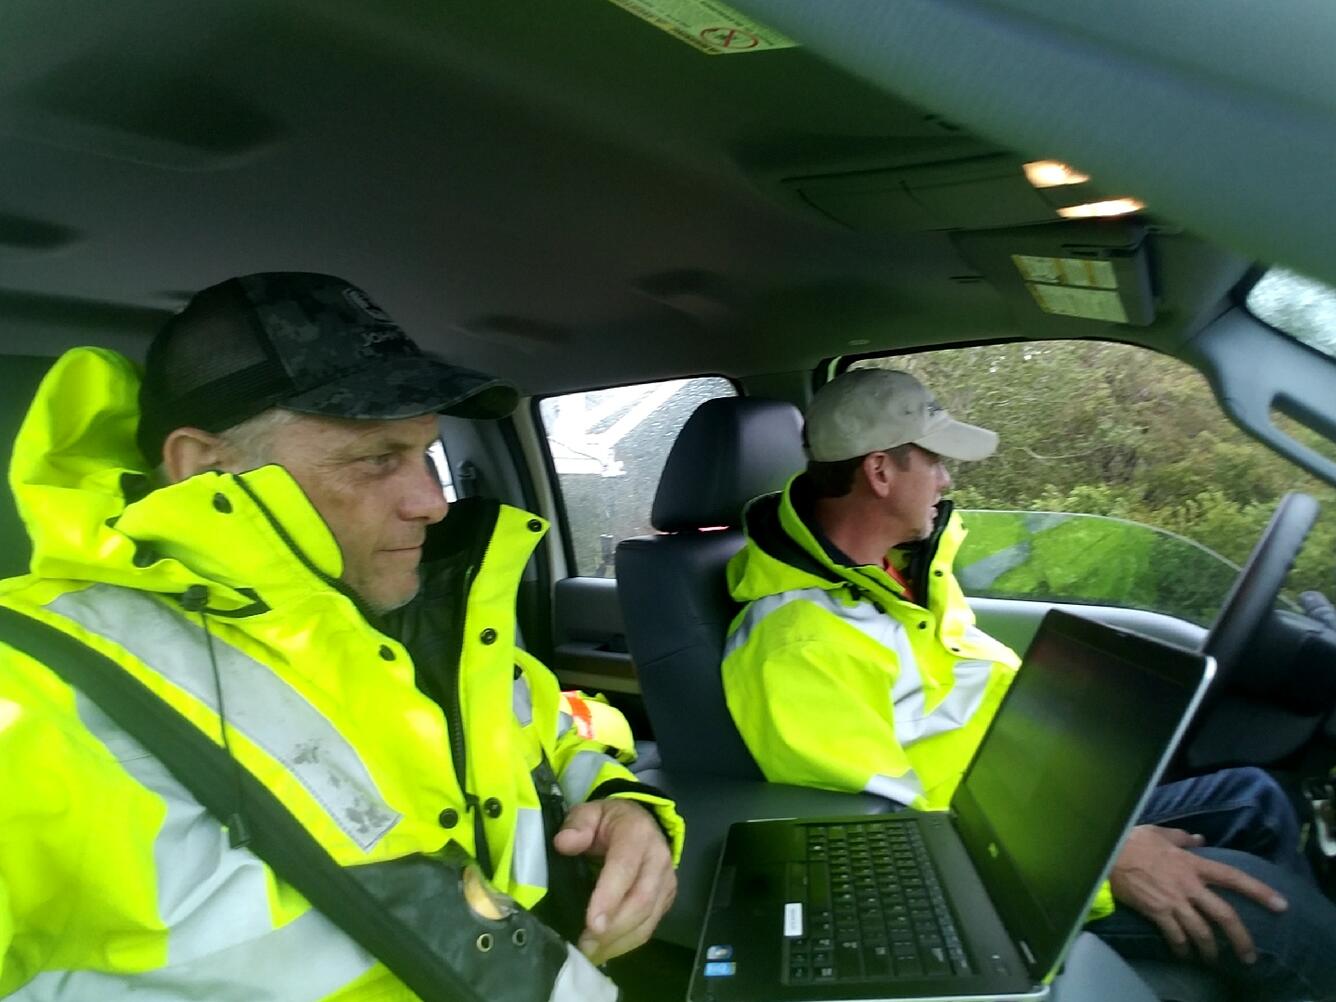 Image shows two USGS scientists in a truck, looking at a computer screen.